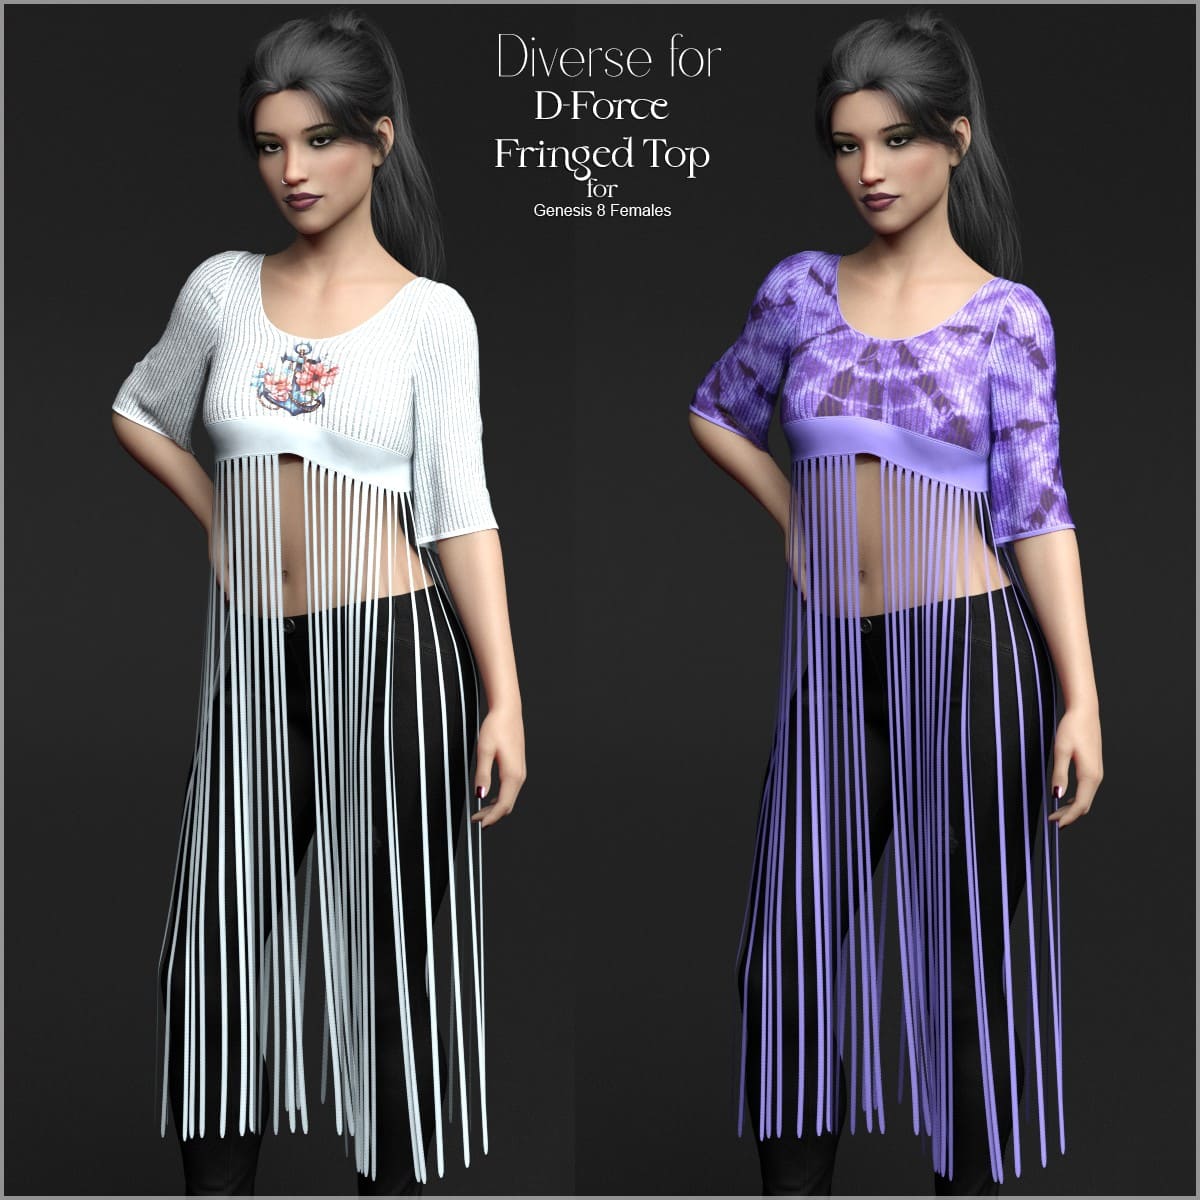 Diverse for D-Force Fringed Top_DAZ3D下载站